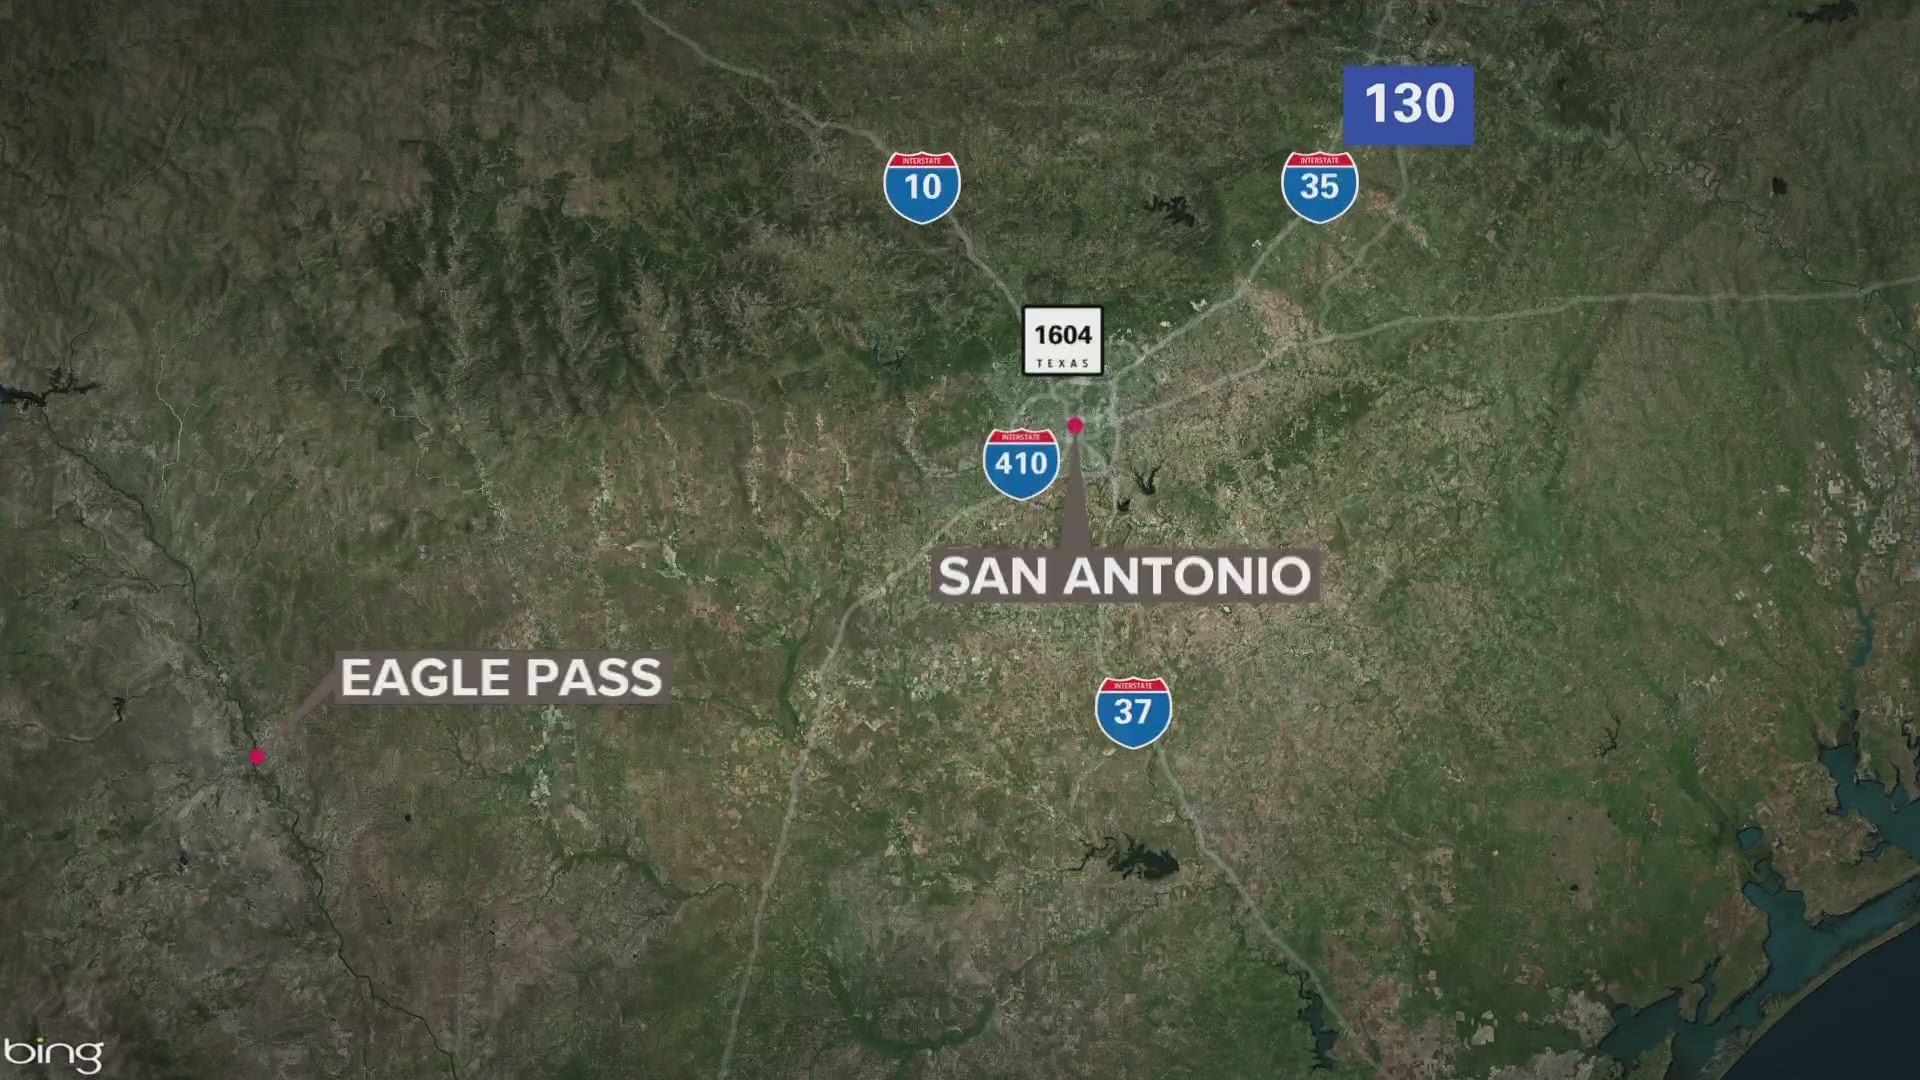 It was the second time this weekend that a migrant was found dead inside a Union Pacific train car in Texas.